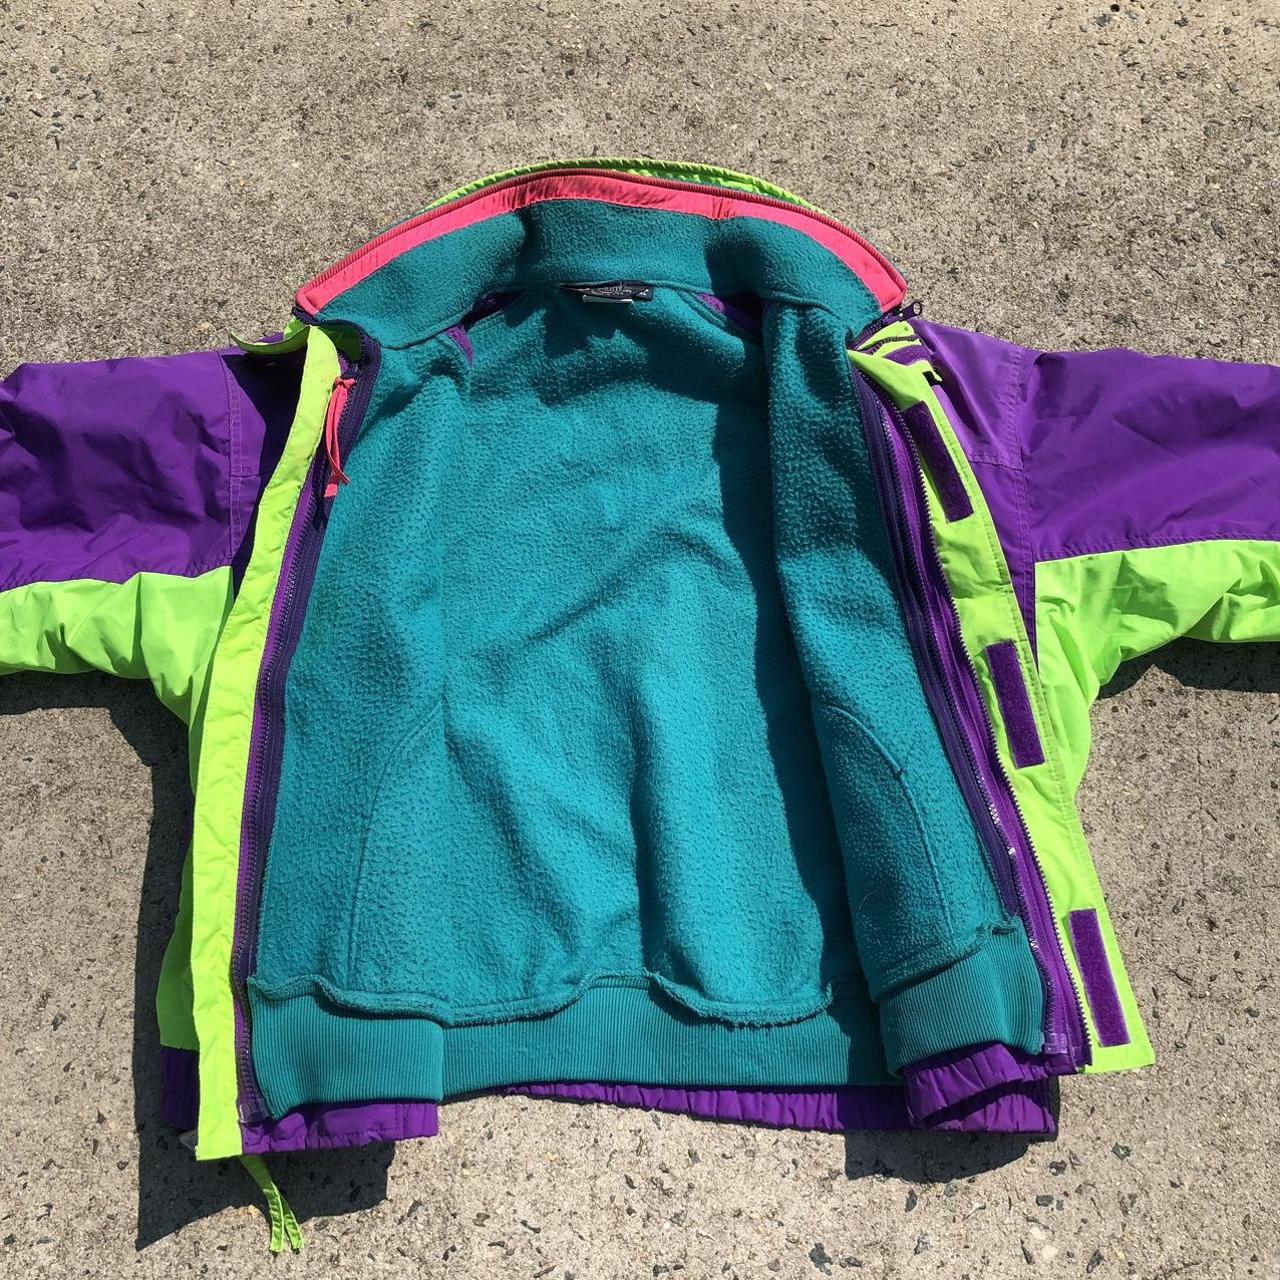 colombia bugaboo jacket mens XL colorful 80s usa made 3 in 1